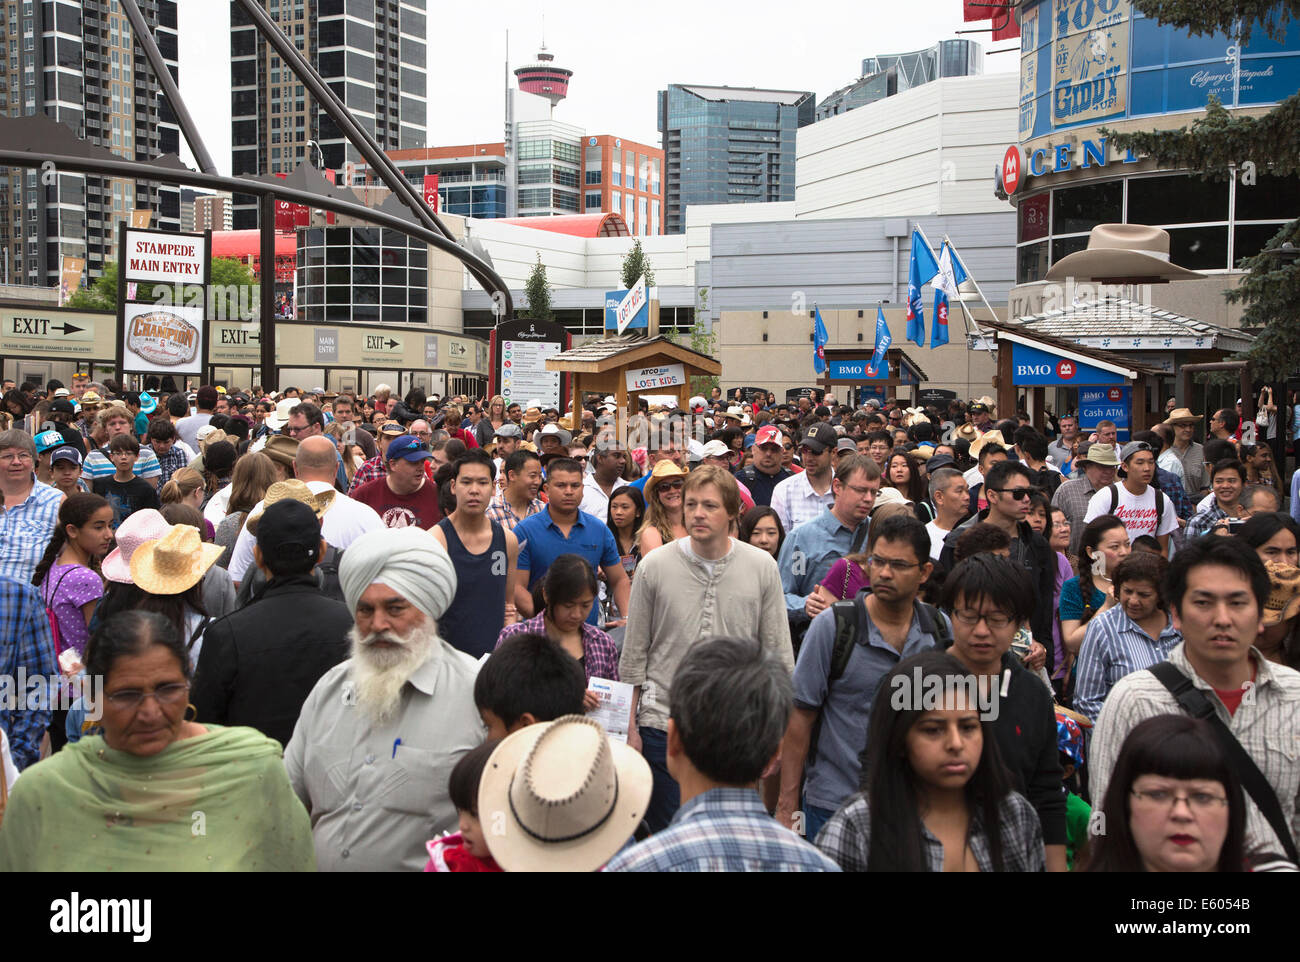 Crowd of people coming through Calgary Stampede main entrance Stock Photo